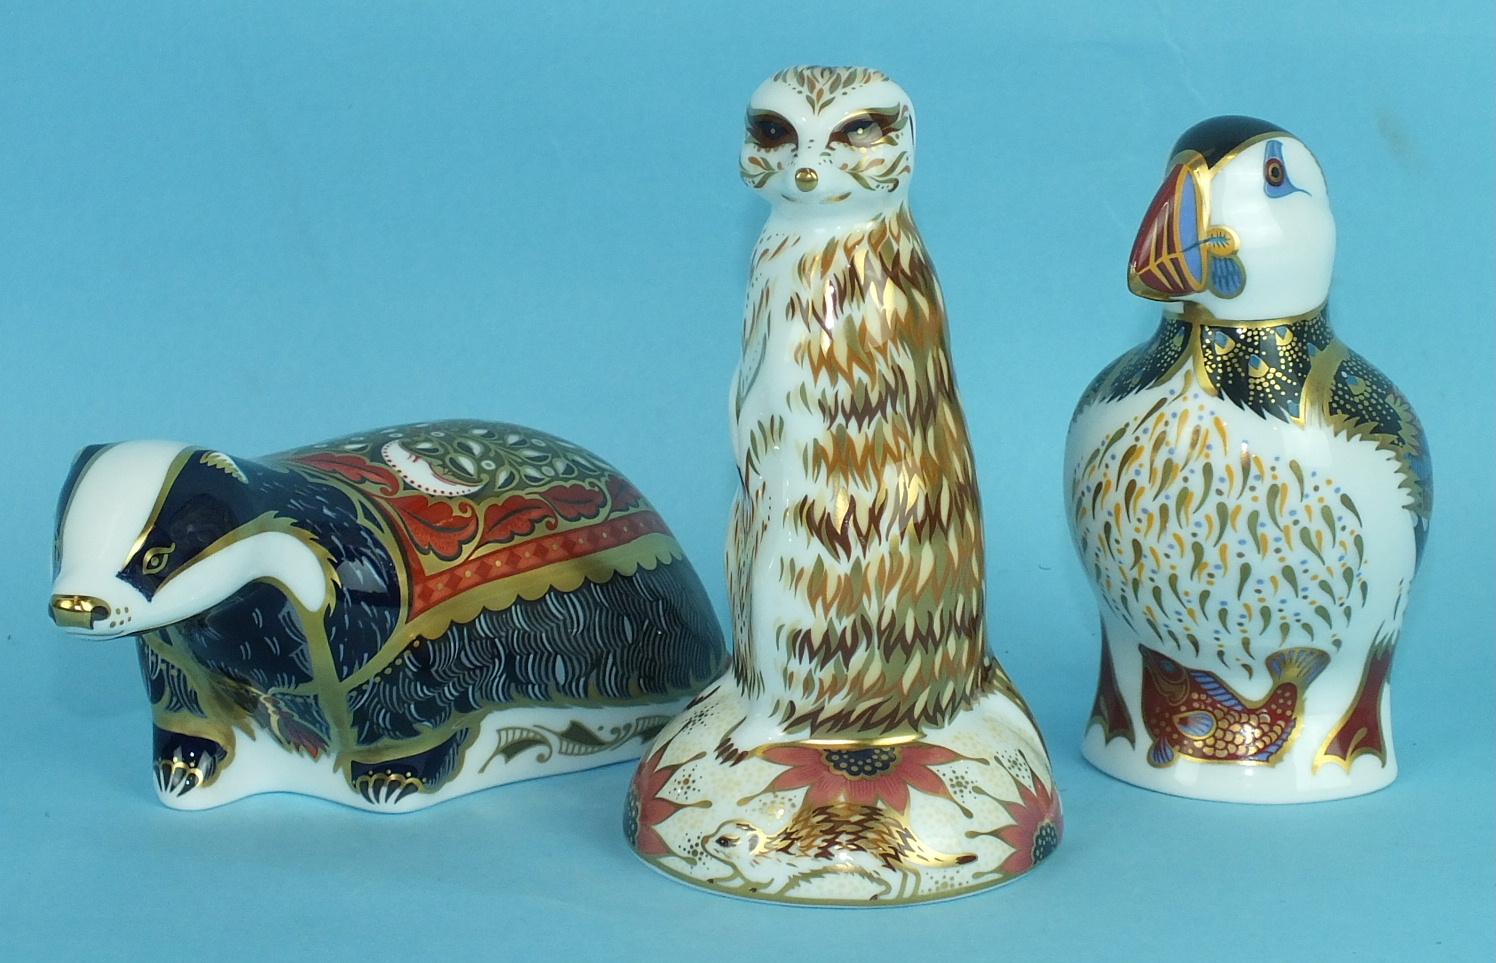 A collection of three Crown Derby animal paperweights, 'Moonlight Badger' (gold), 'Meercat' (